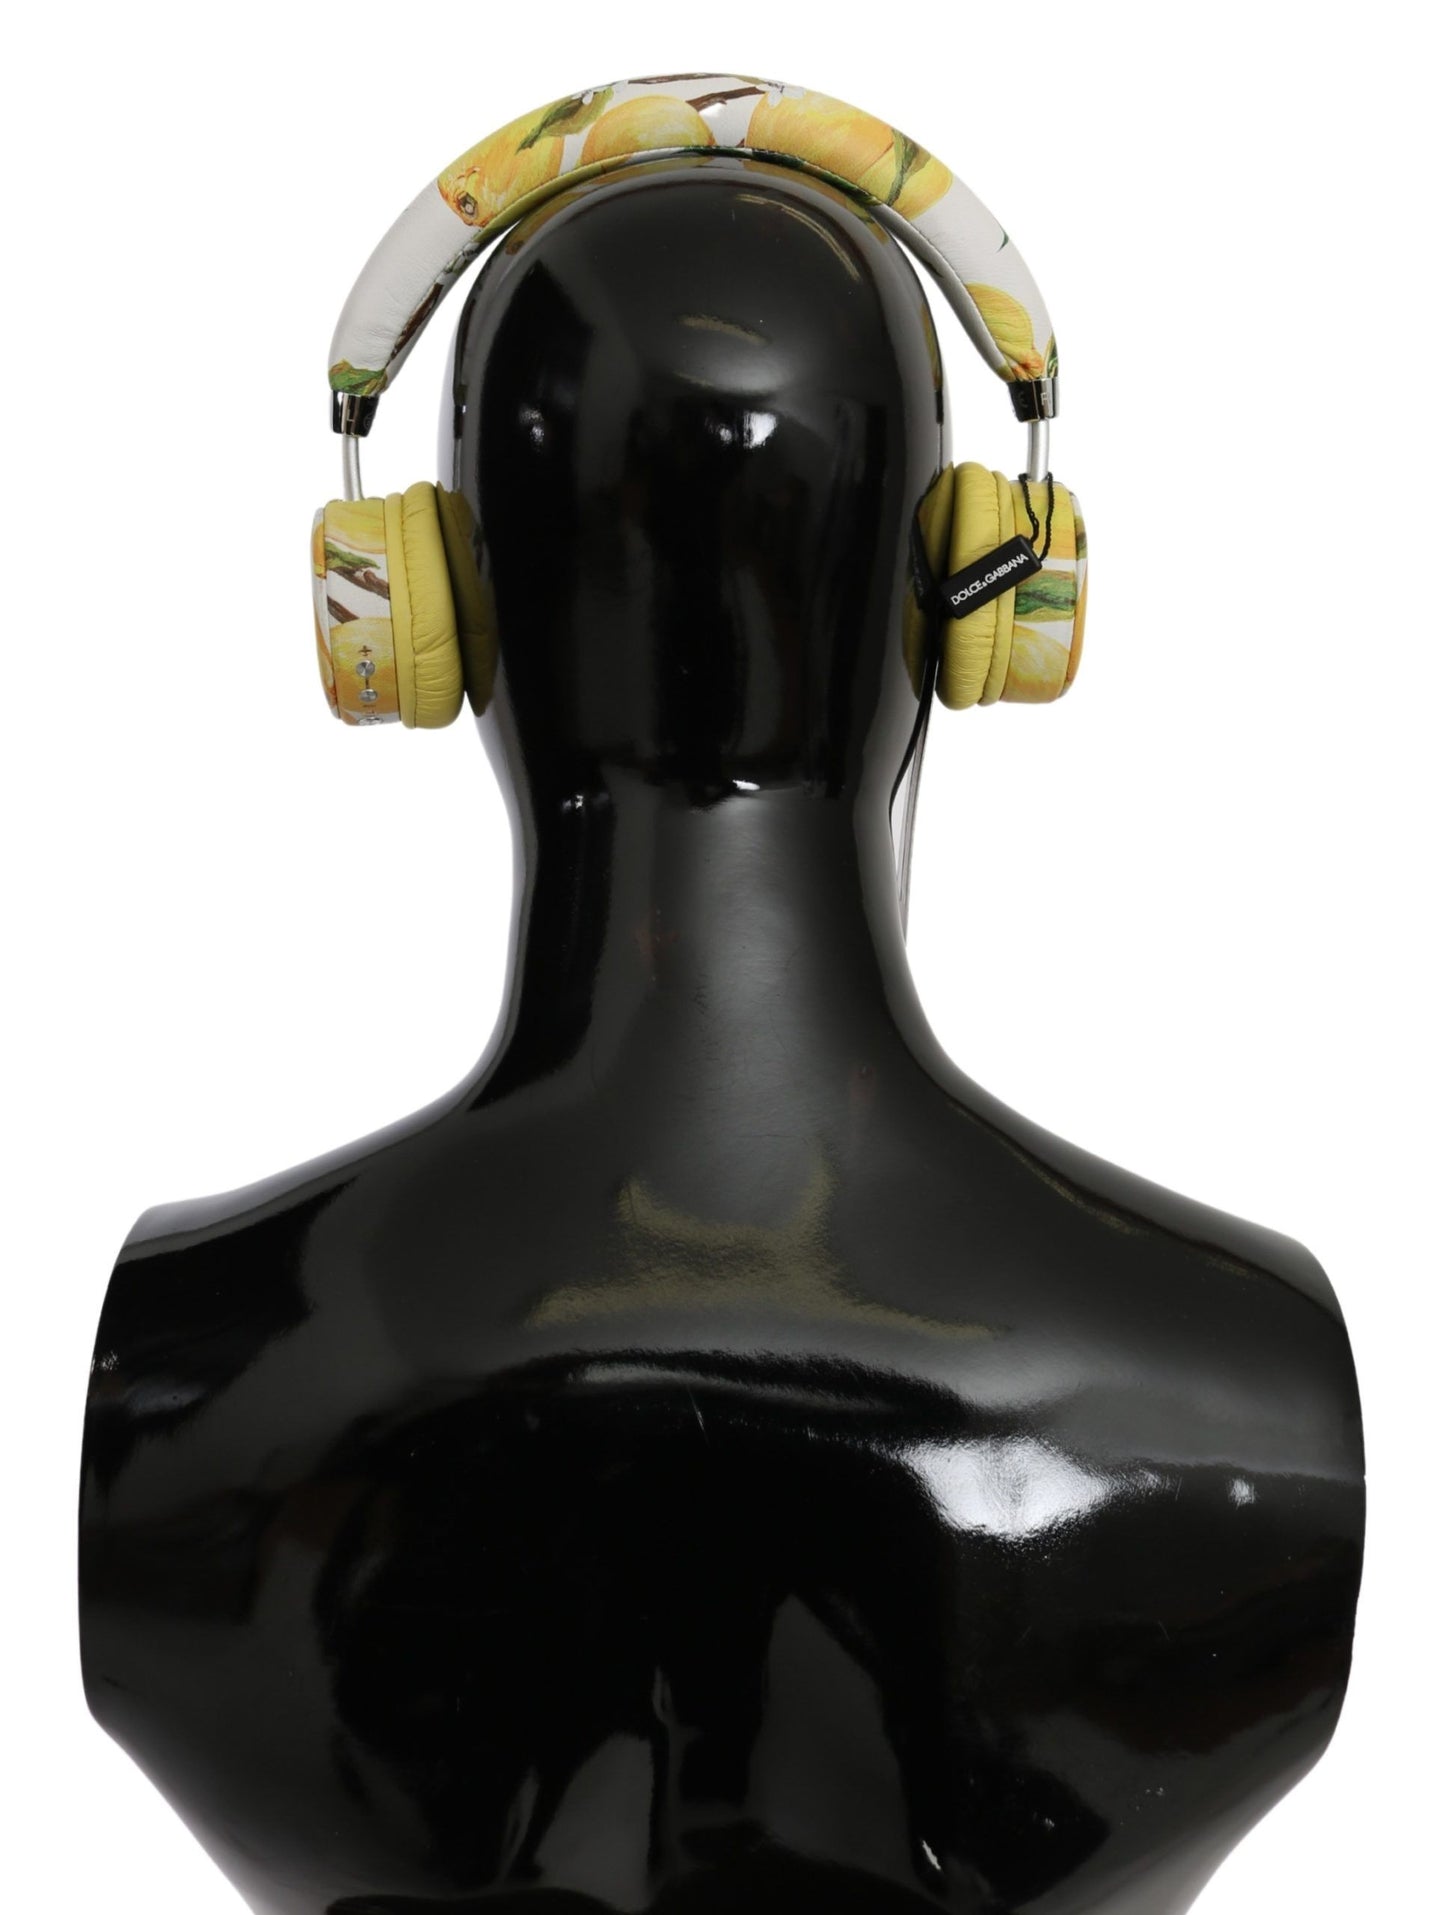 Chic White Leather Headphones with Yellow Print